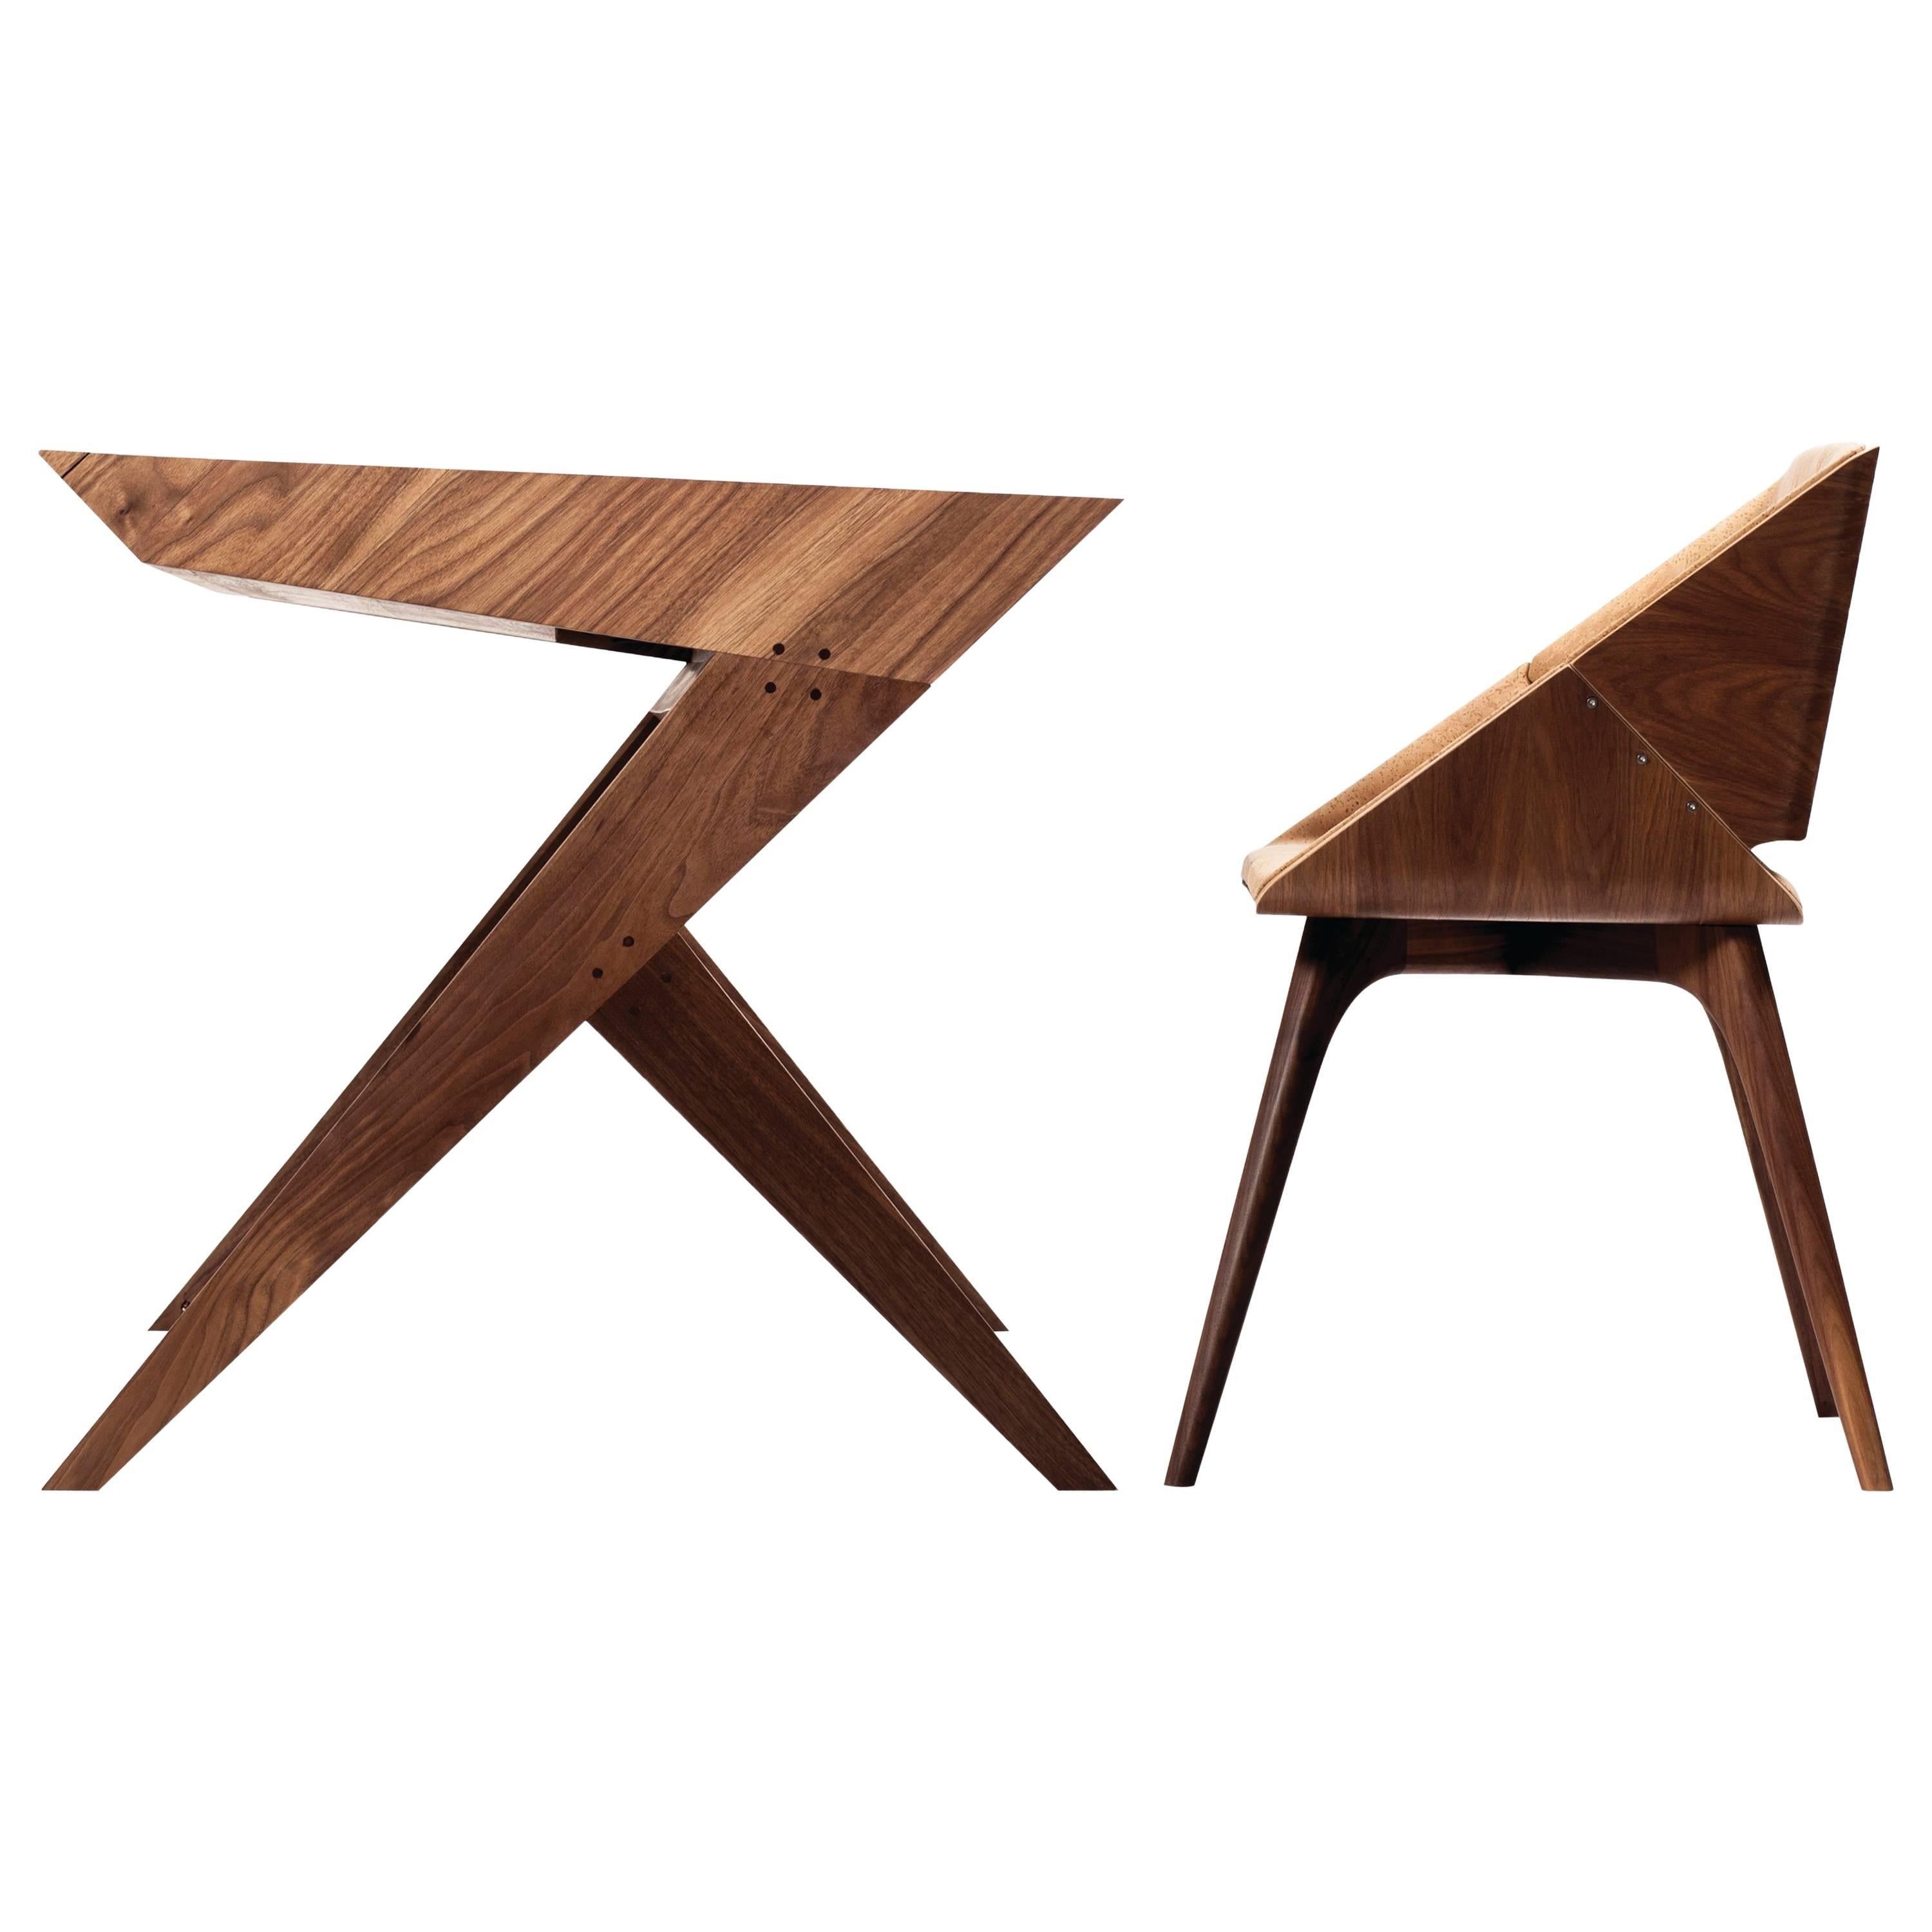 "Locust" Wood Desk with "Nest" Chair by Alexandre Caldas For Sale